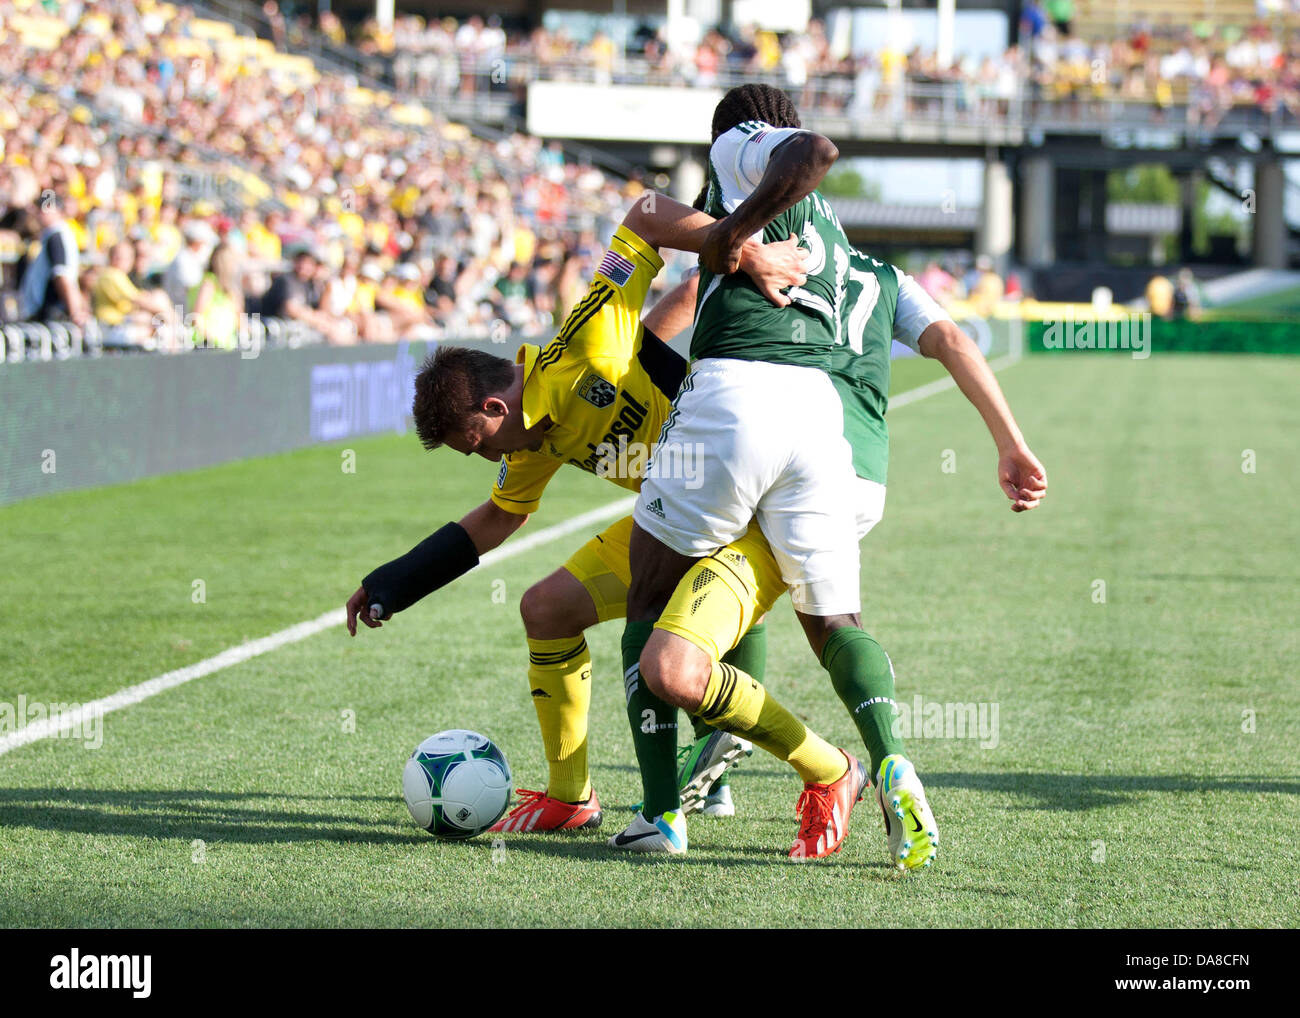 Columbus, OH, USA. 7th July, 2013. July 07, 2013: Columbus Crew Ethan Finlay (13) is tangled up with Portland Timbers Diego Chara (21) and Michael Nanchoff (17) as he battles for the ball during the Major League Soccer match between the Portland Timbers and the Columbus Crew at Columbus Crew Stadium in Columbus, OH. The Columbus Crew defeated the Portland Timbers 1-0. Credit:  csm/Alamy Live News Stock Photo